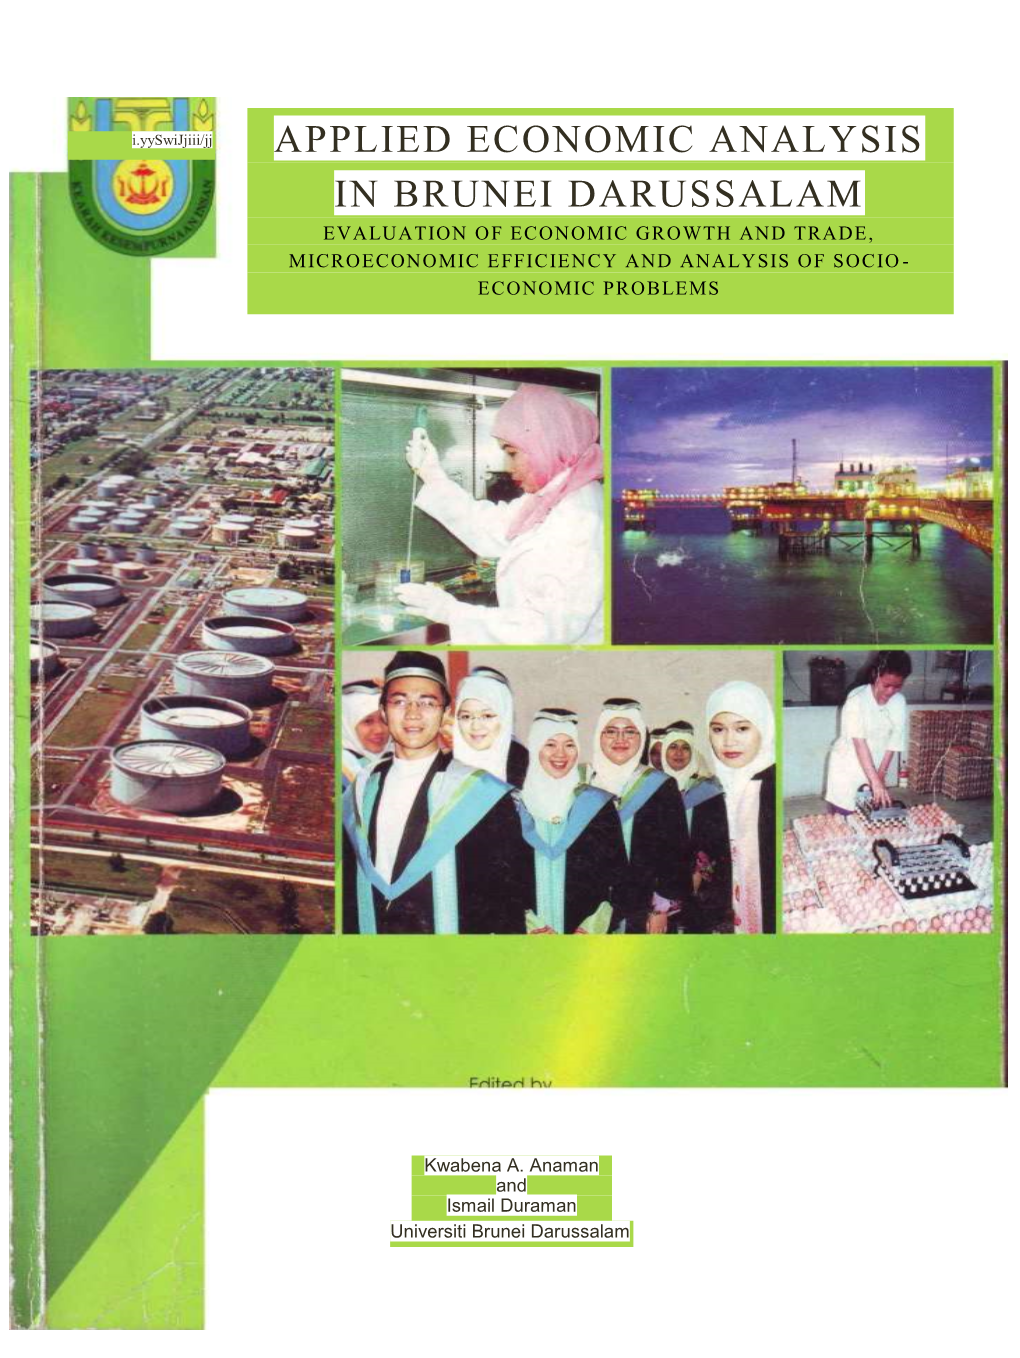 Economic Problems of Low-Income Immigrant Workers in Brunei Darussalam